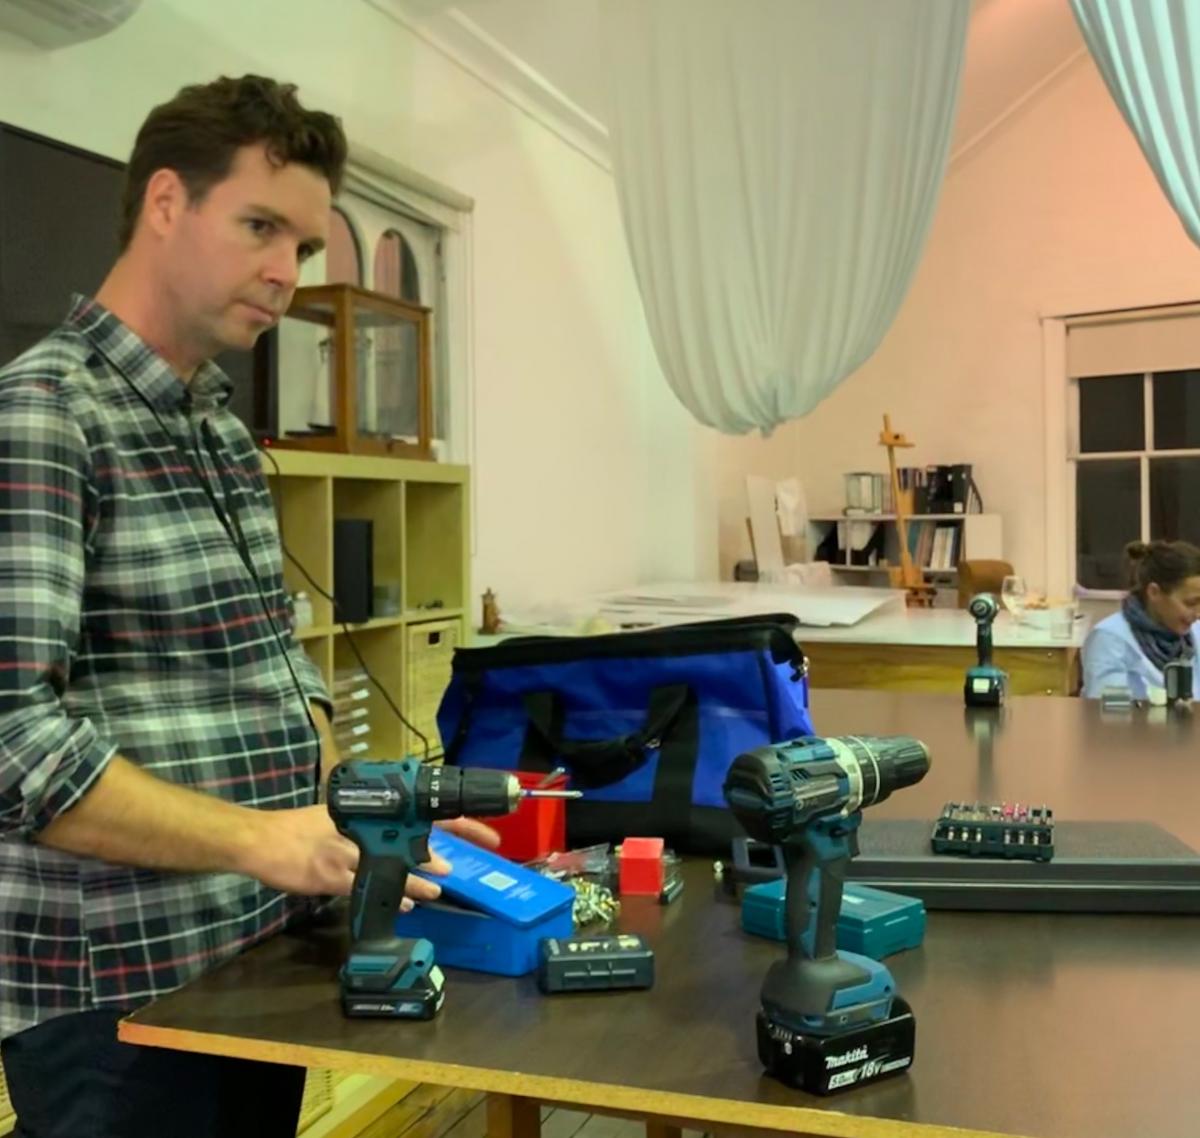 Nick shows us ANMM’s cordless drills and bits